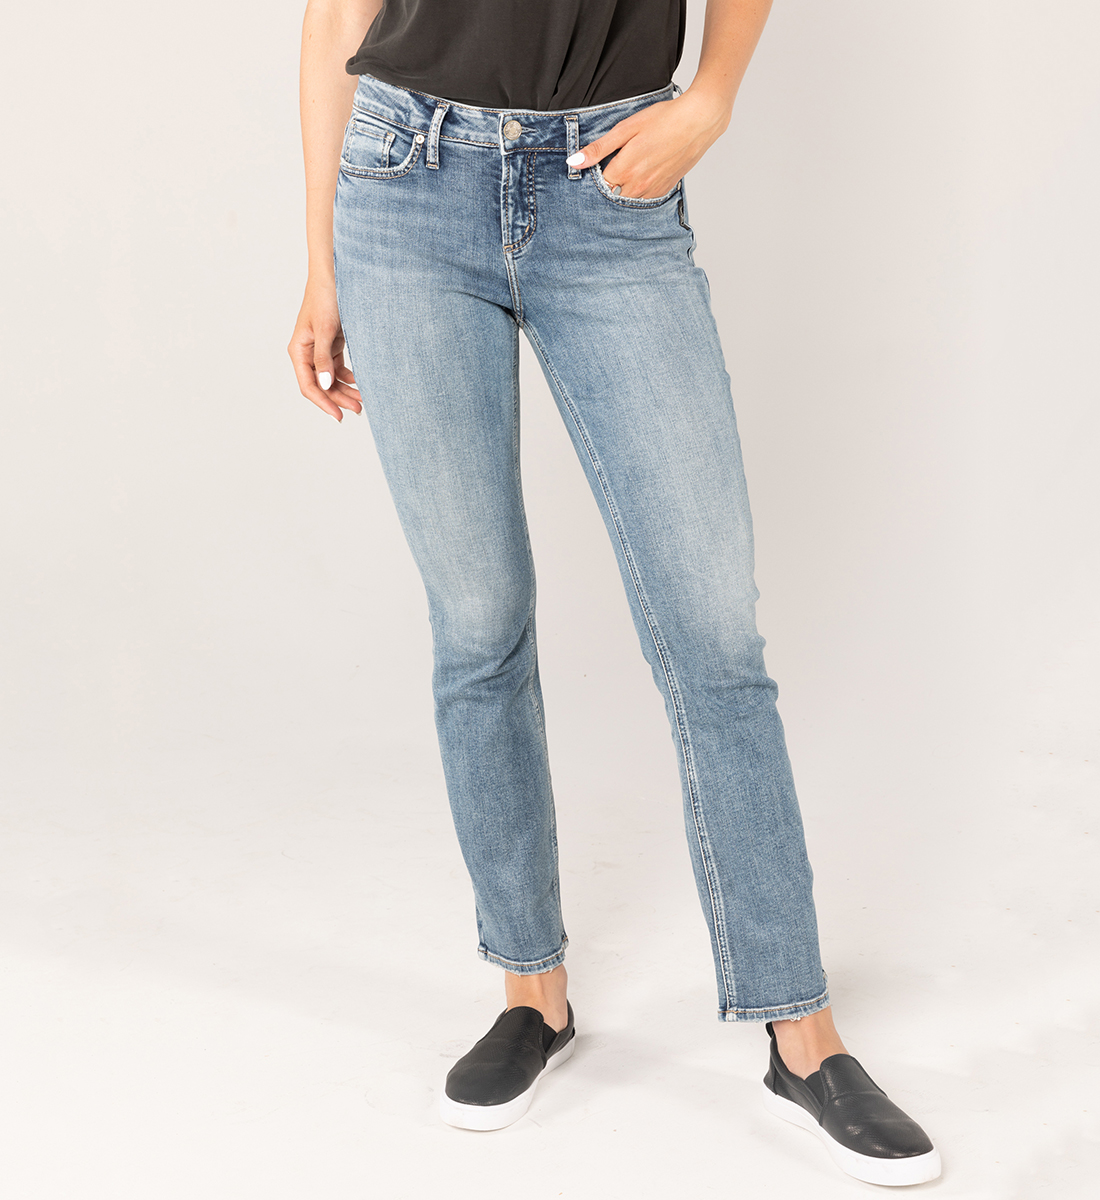 Elyse Mid Rise Slim Bootcut Jeans - Silver Jeans US